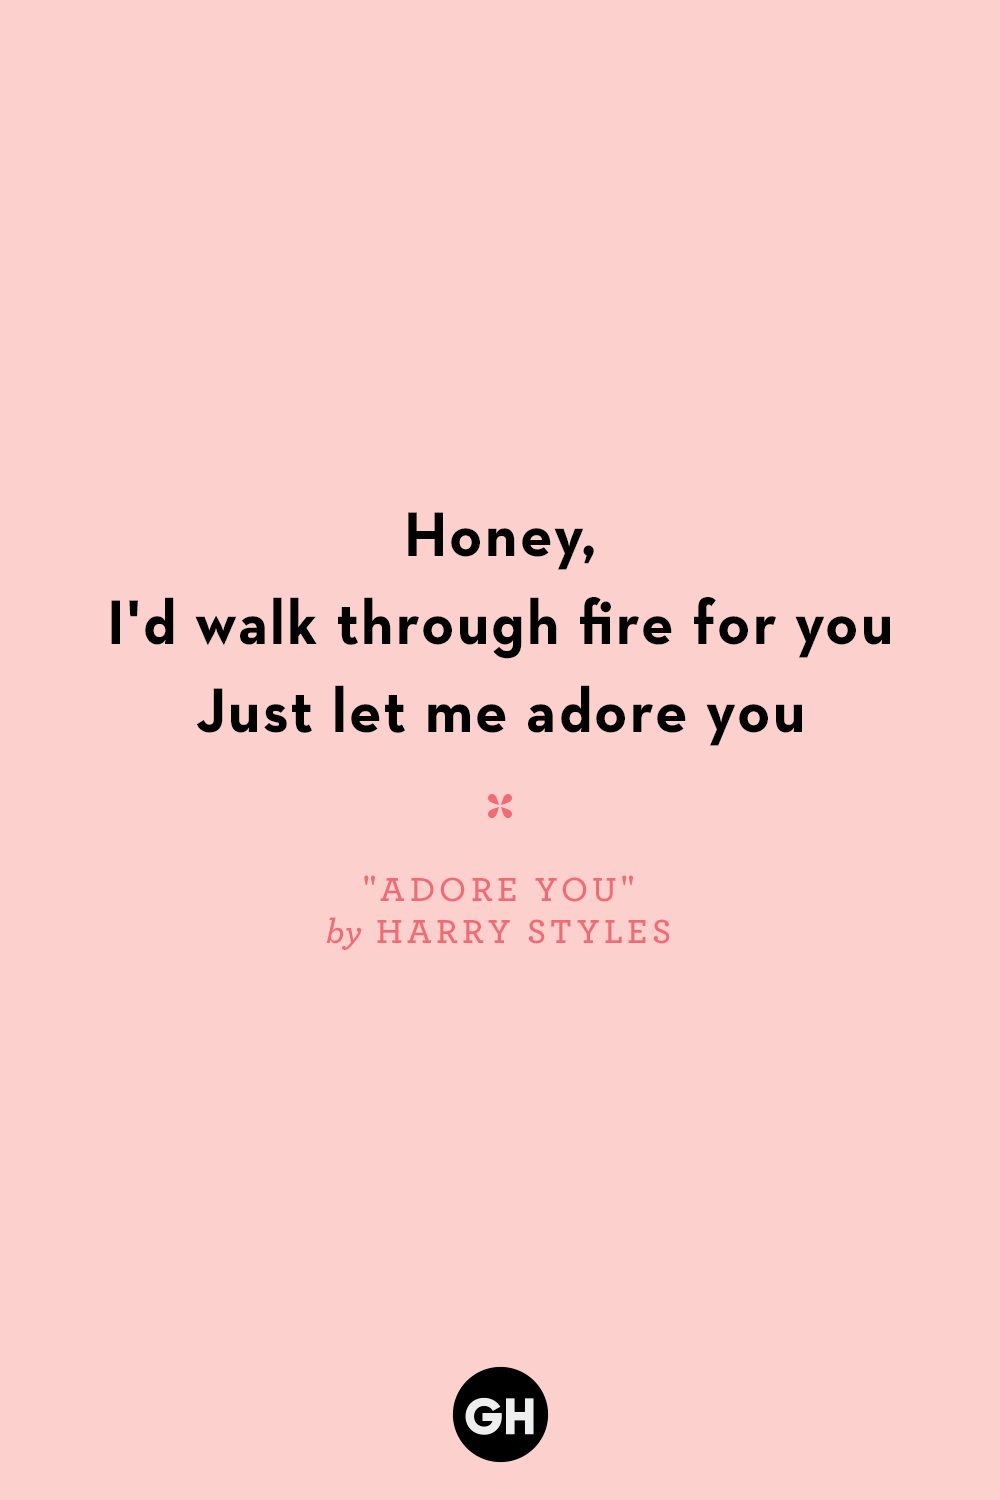 Best Love Song Quotes - Photos